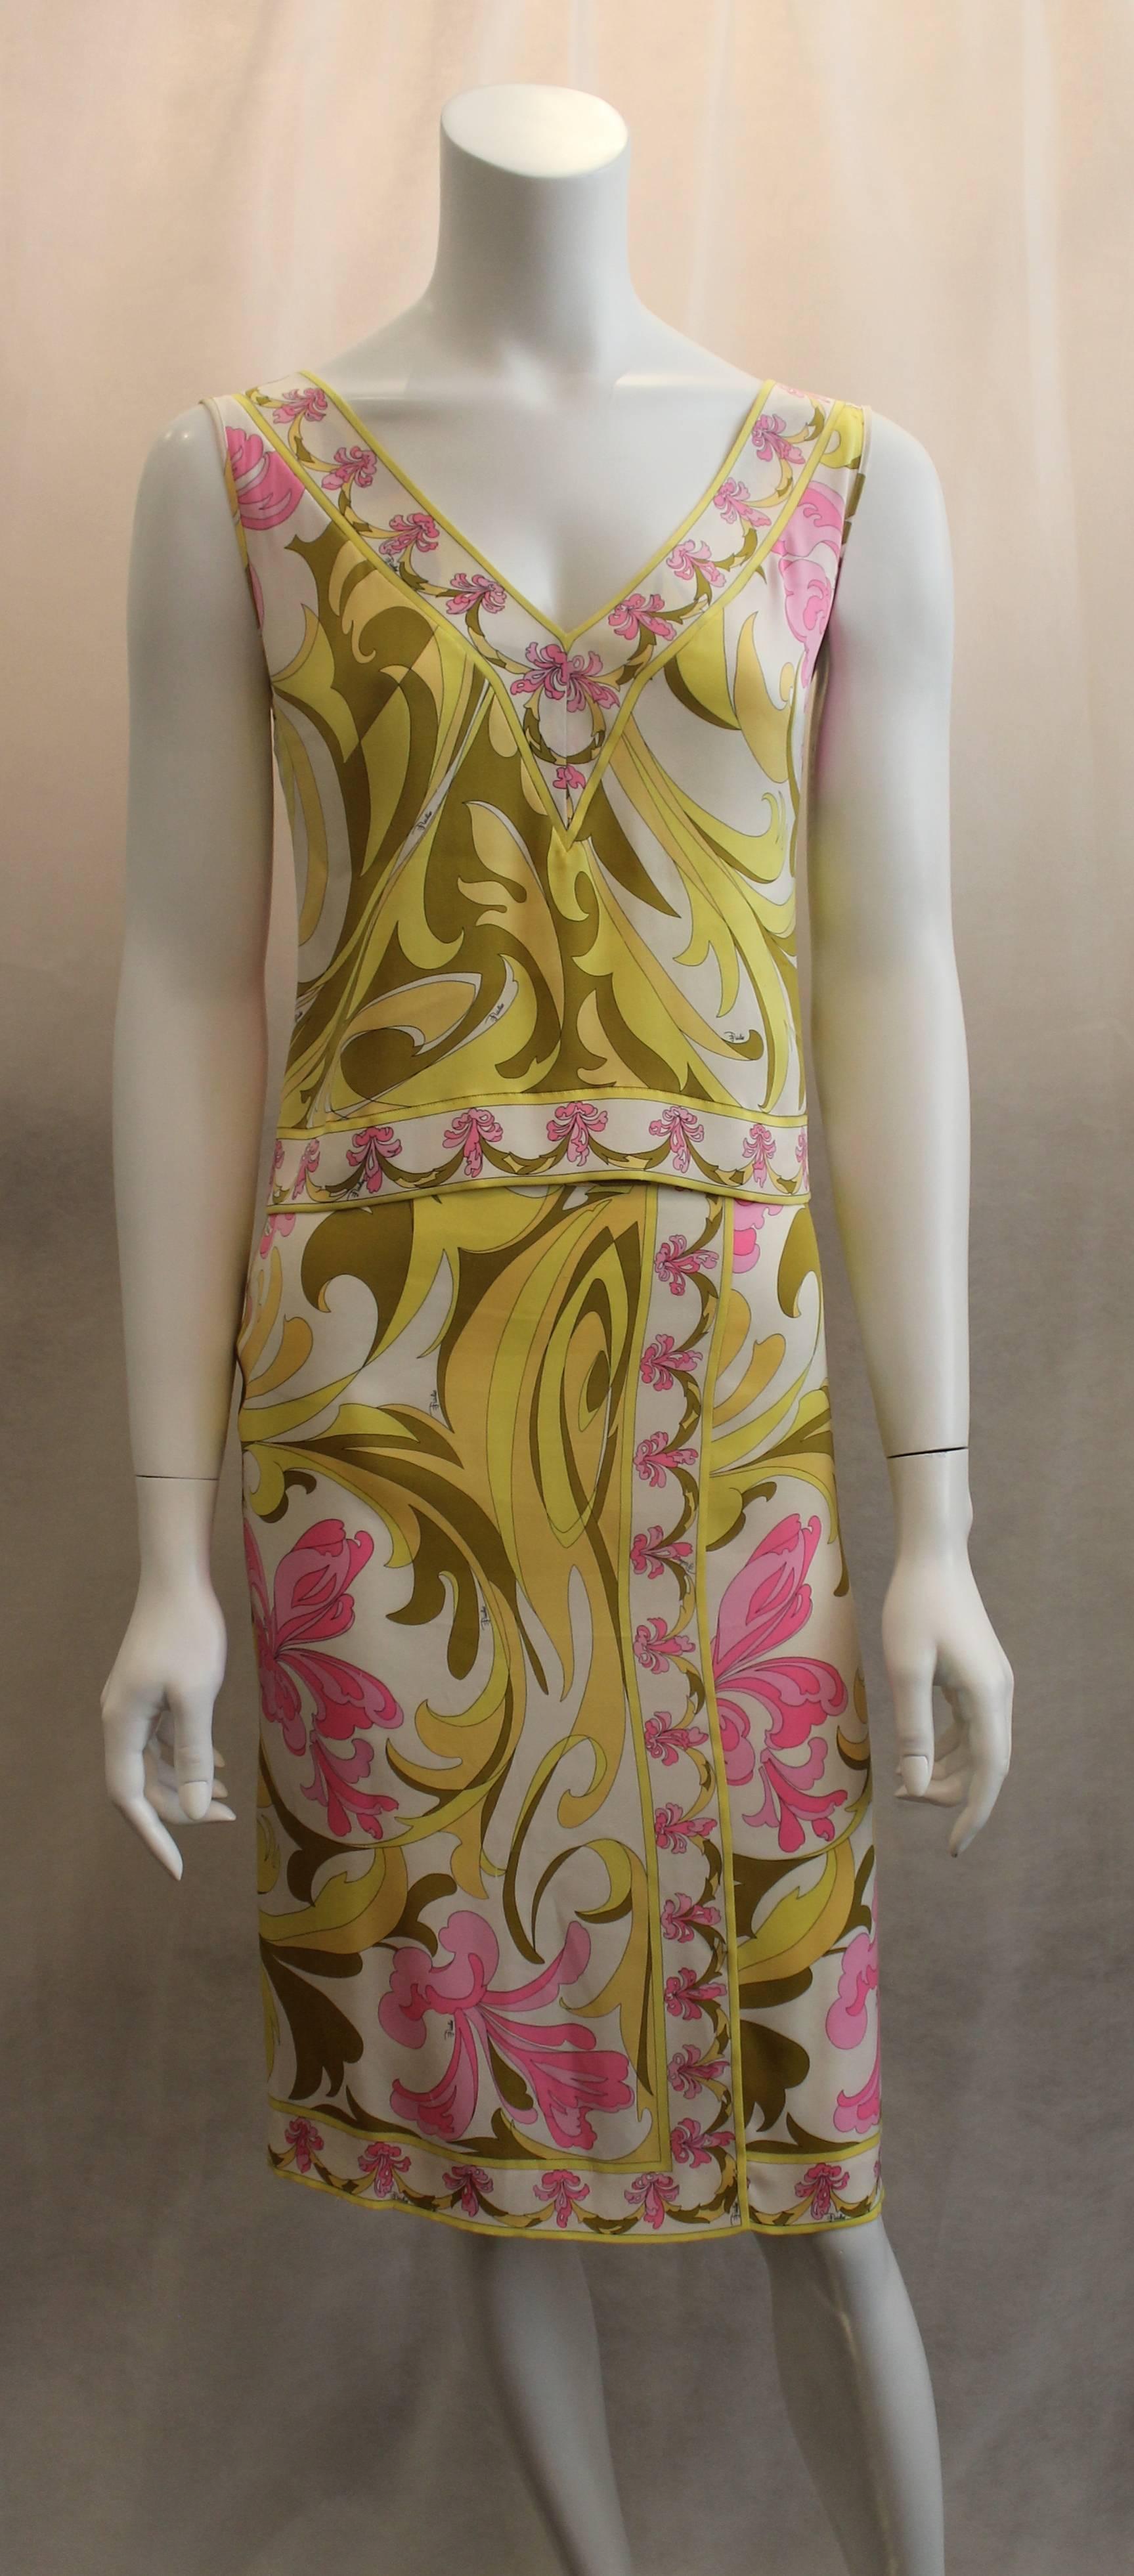 Women's Emilio Pucci Yellow, Green & Pink Printed Sleeveless Top - 4 - 1980's 